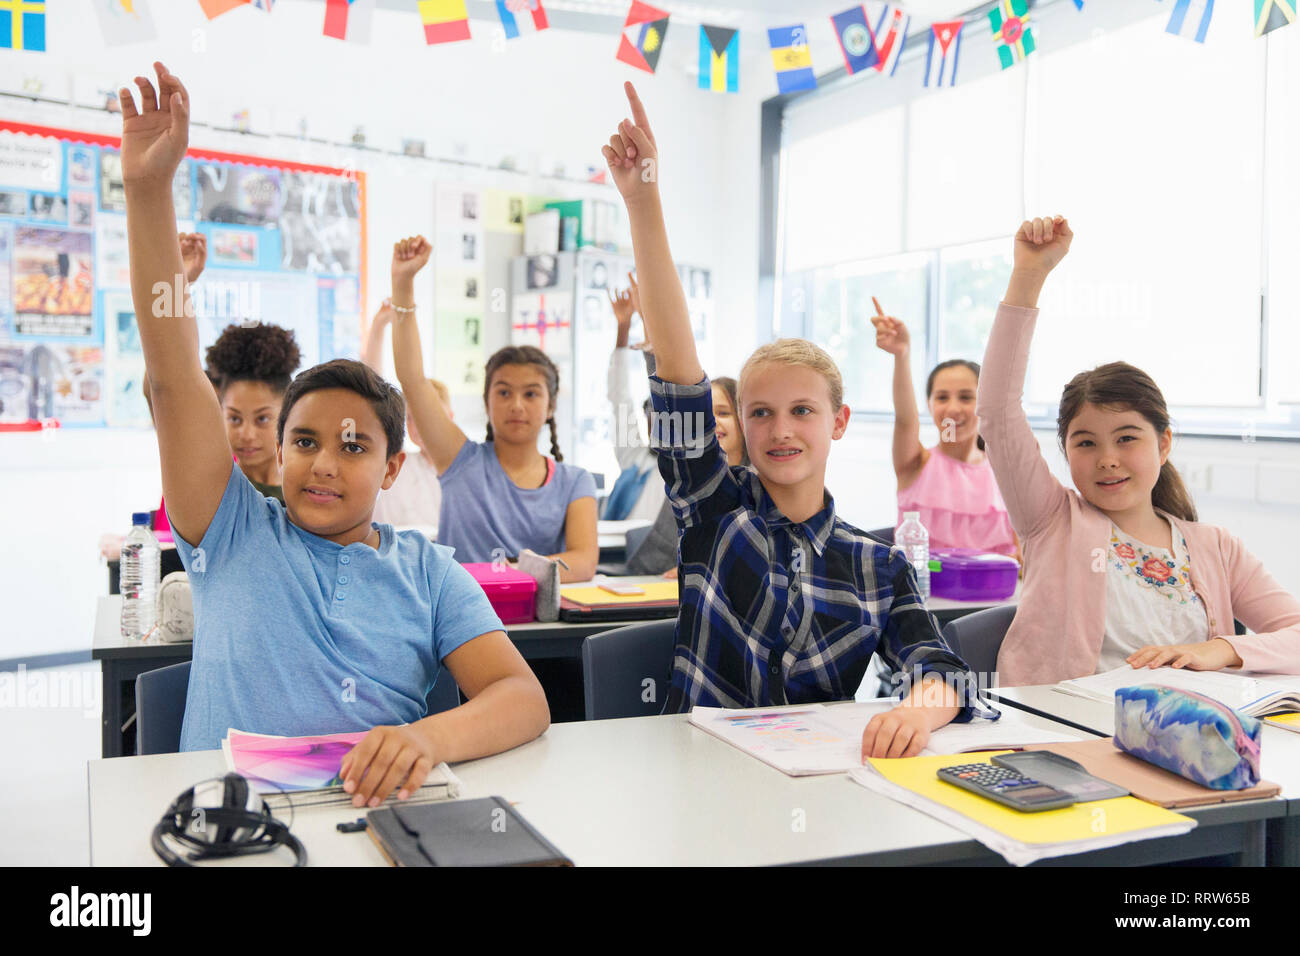 Eager junior high school students with hands raised in classroom Stock Photo